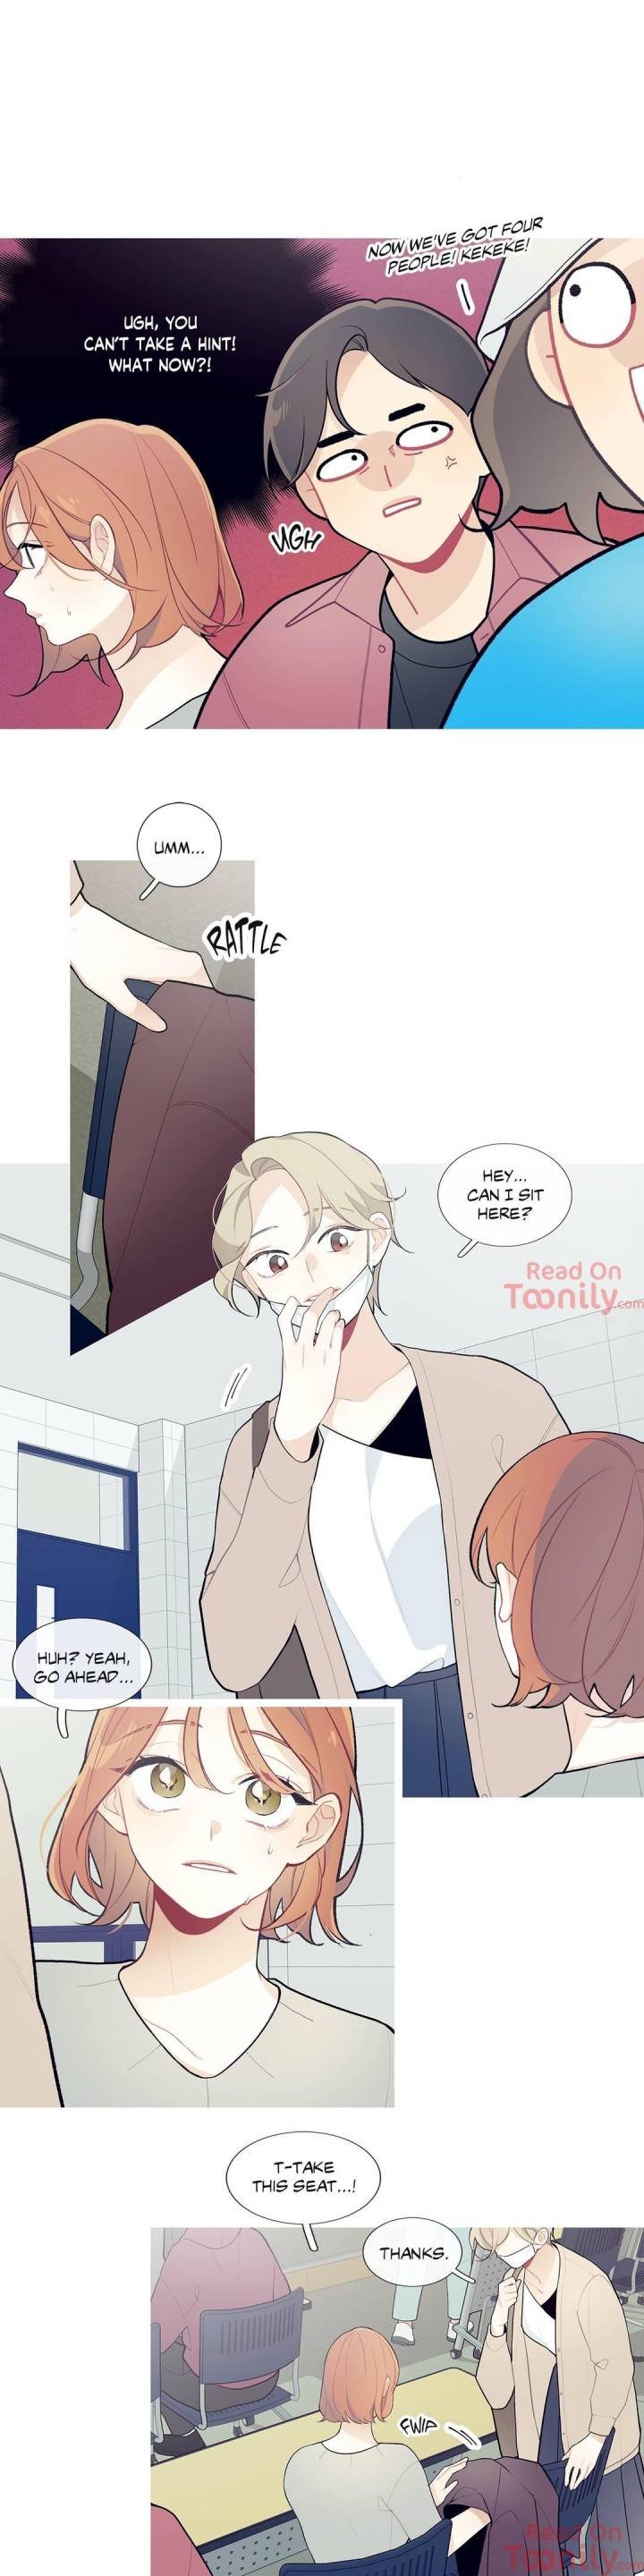 whats-going-on-chap-32-6